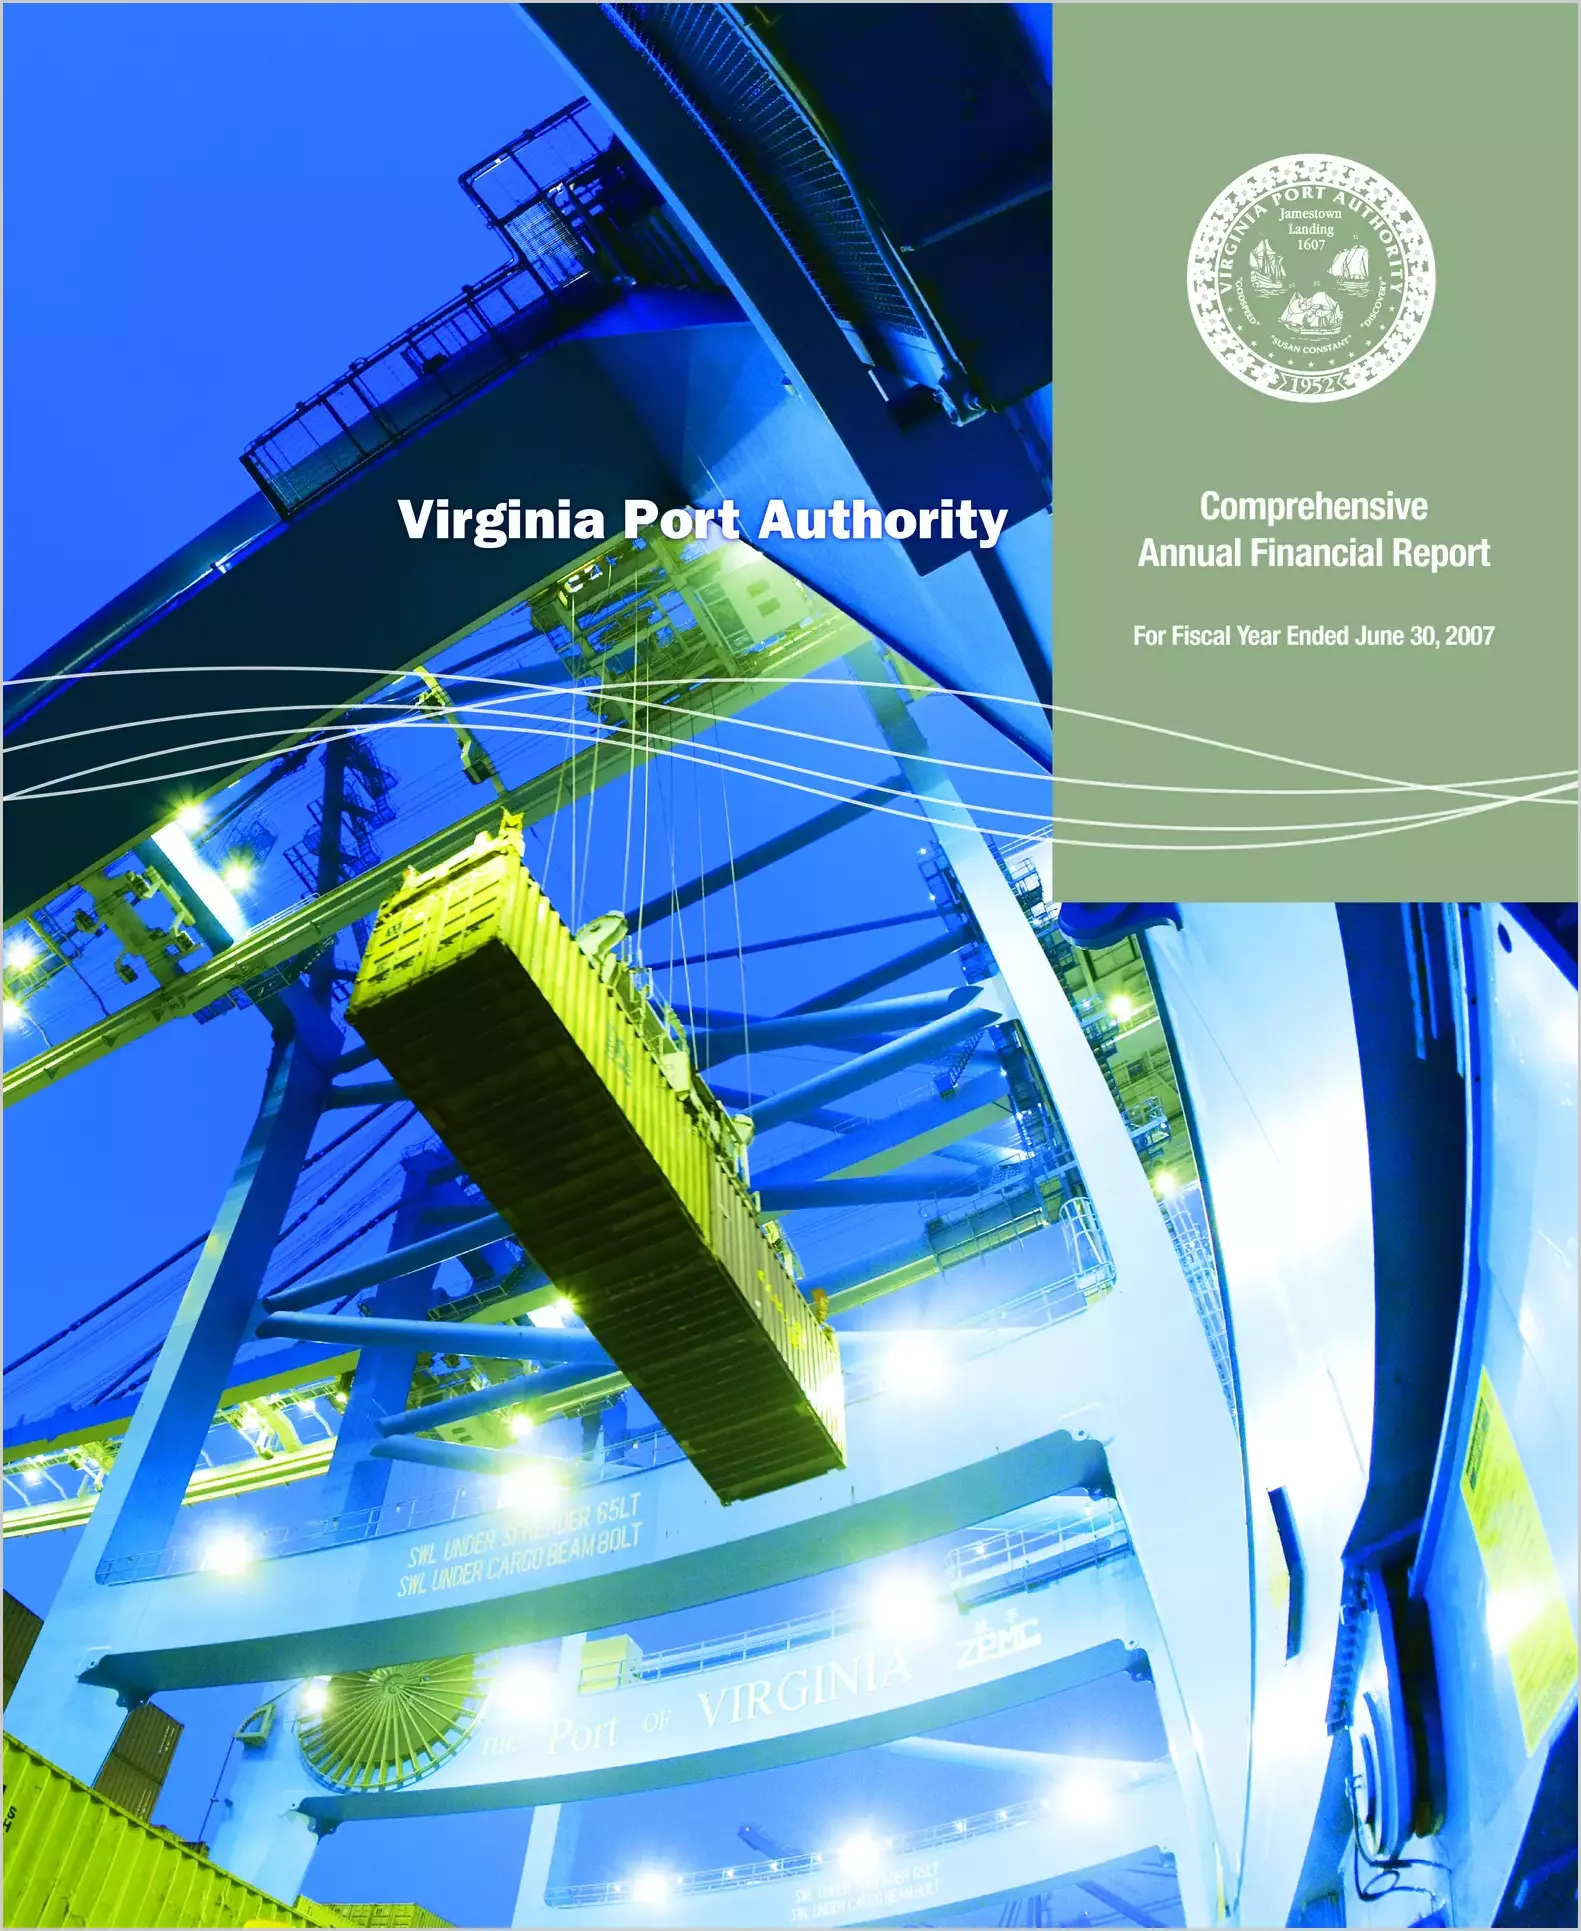 Virginia Port Authority Annual Financial Report for the year ended June 30, 2007